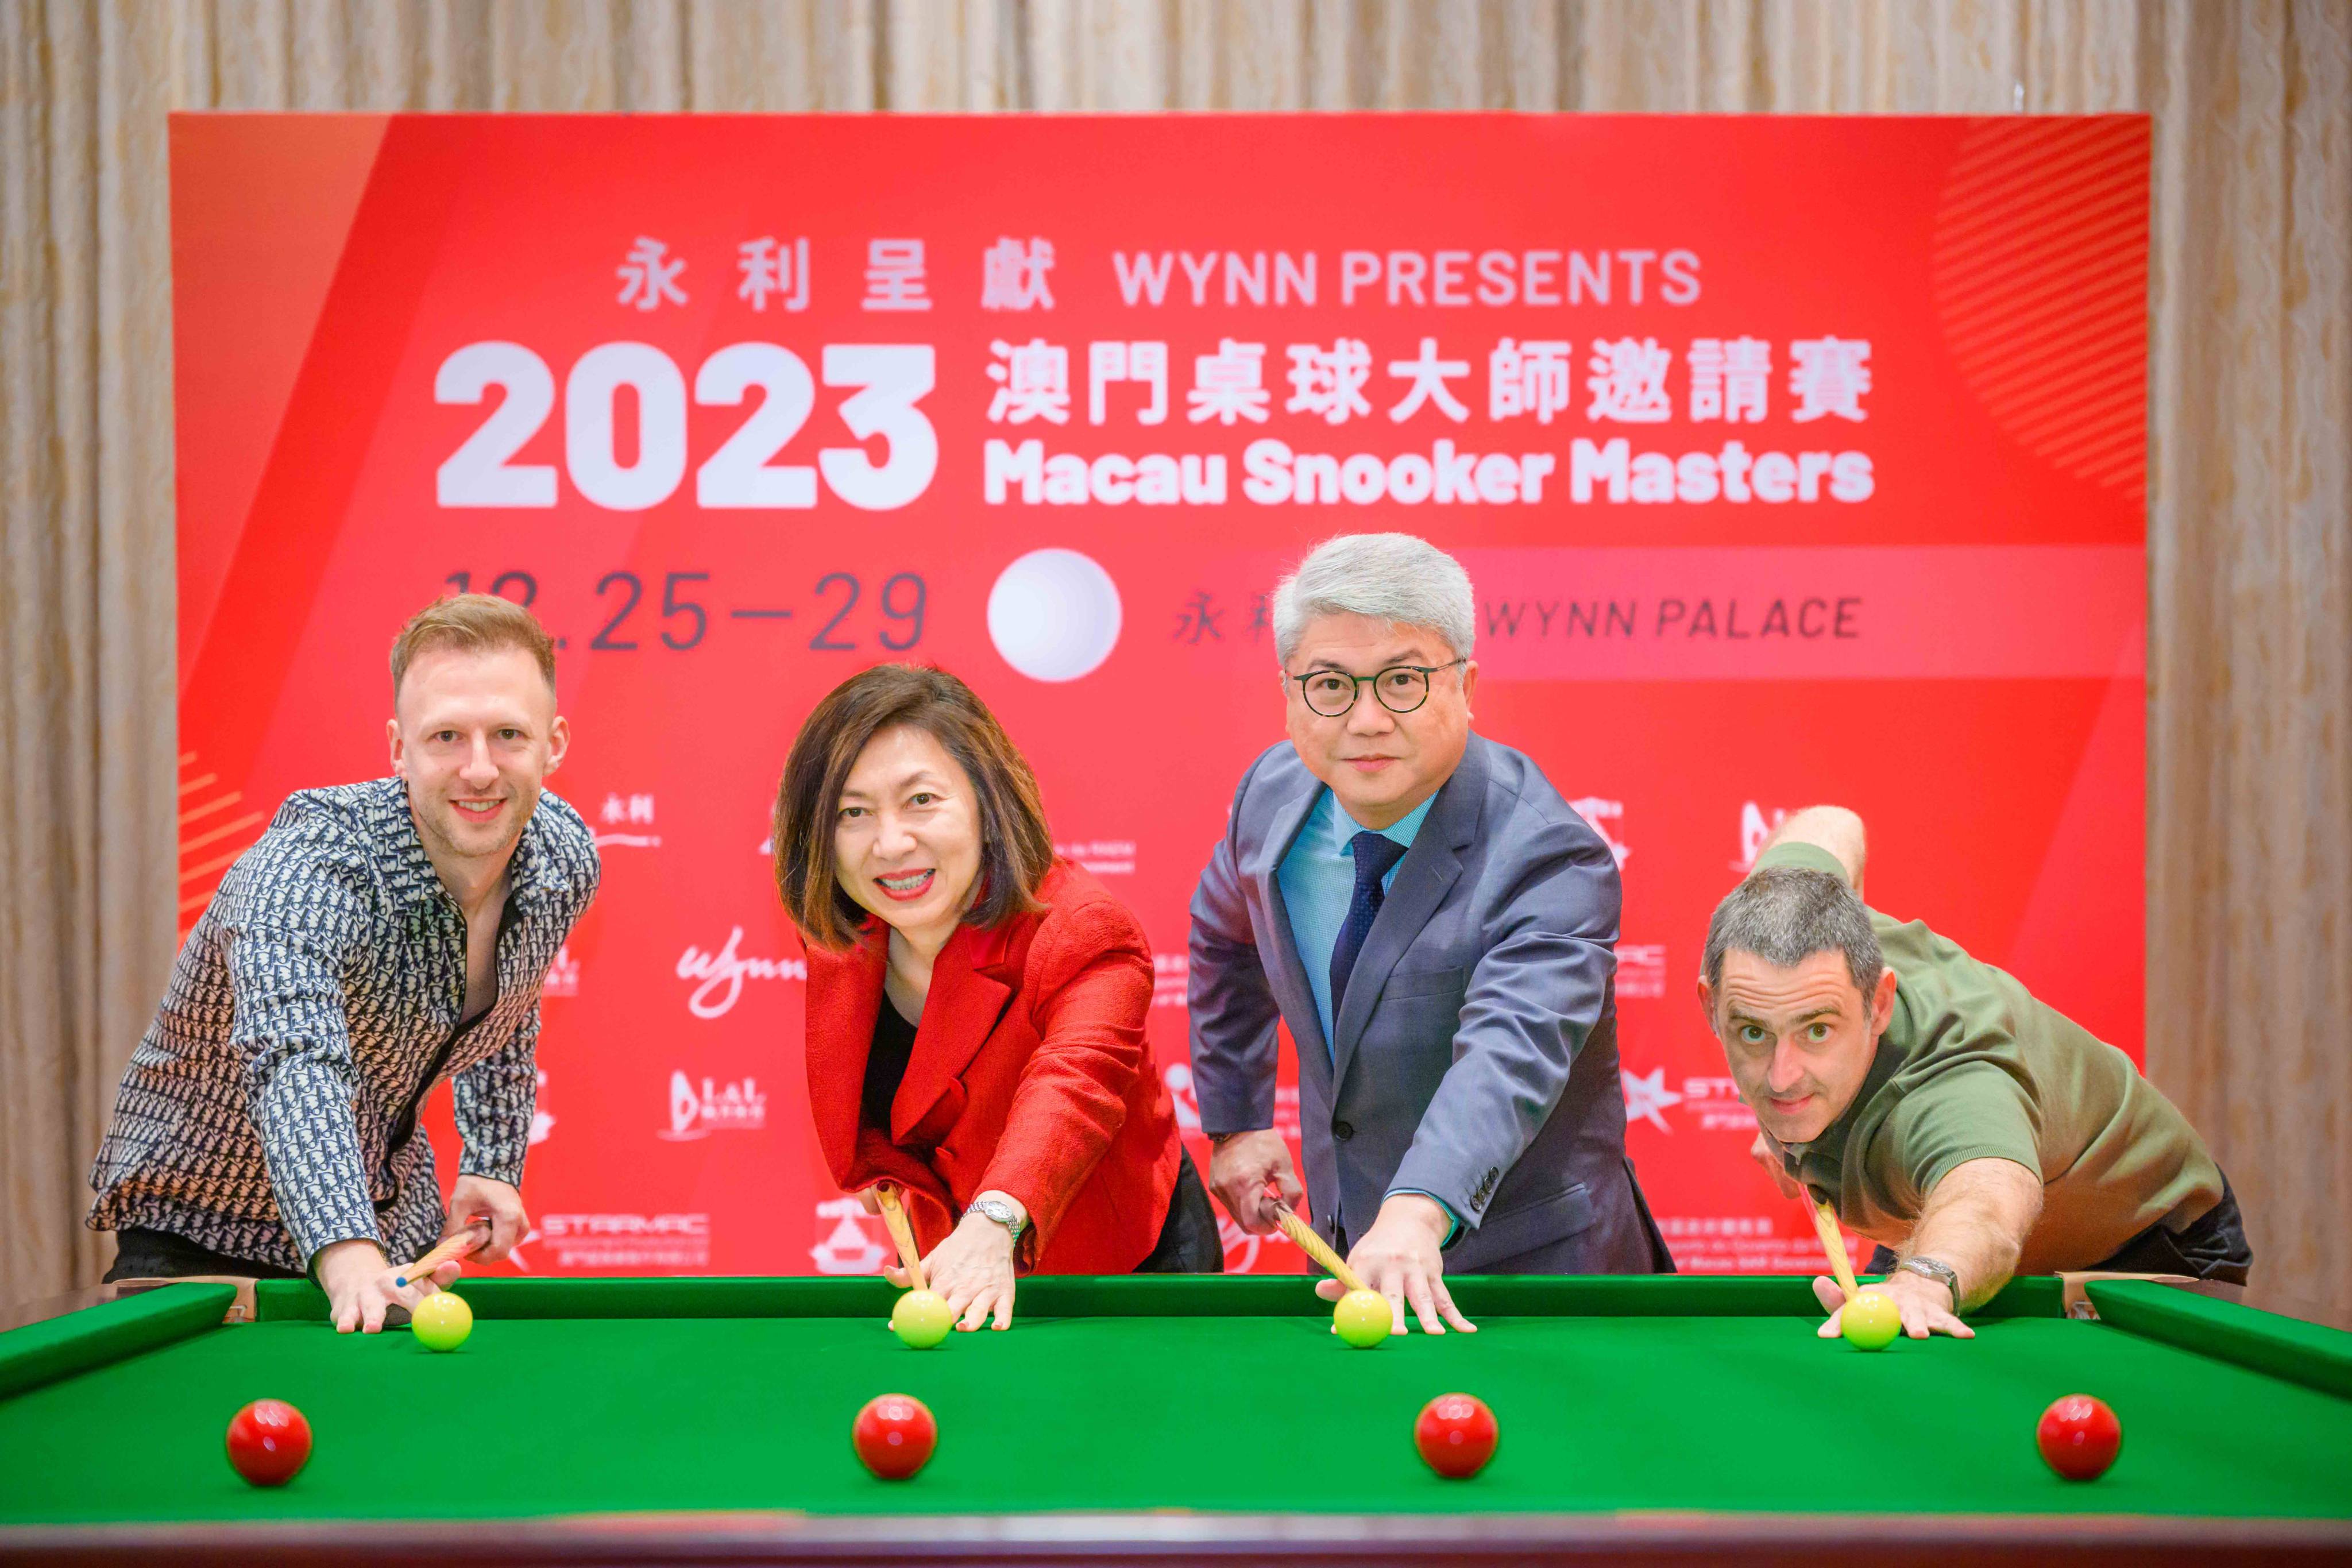 Judd Trump (far left) and Ronnie O’Sullivan at the launch of the 2023 Macau Snooker Masters. Photo: Macau Snooker Masters